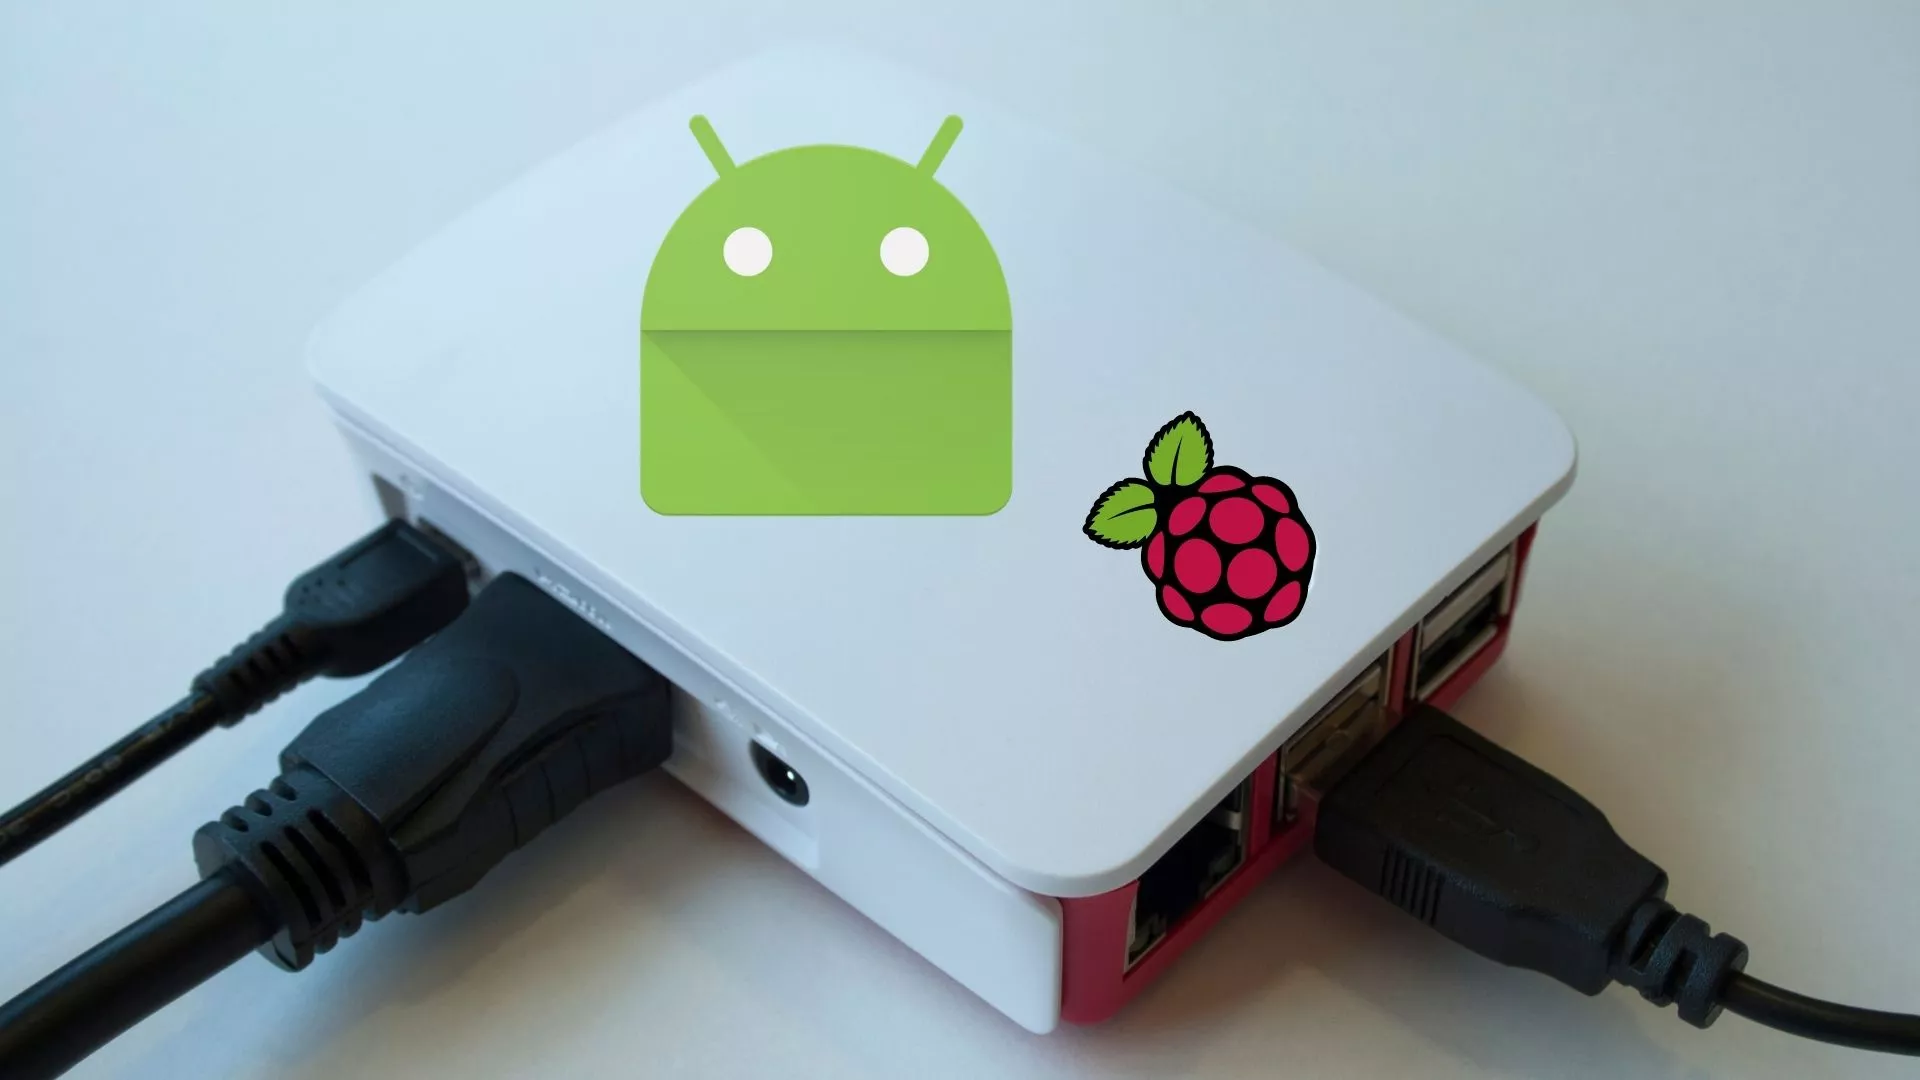 How To Install Android On Raspberry Pi 4?